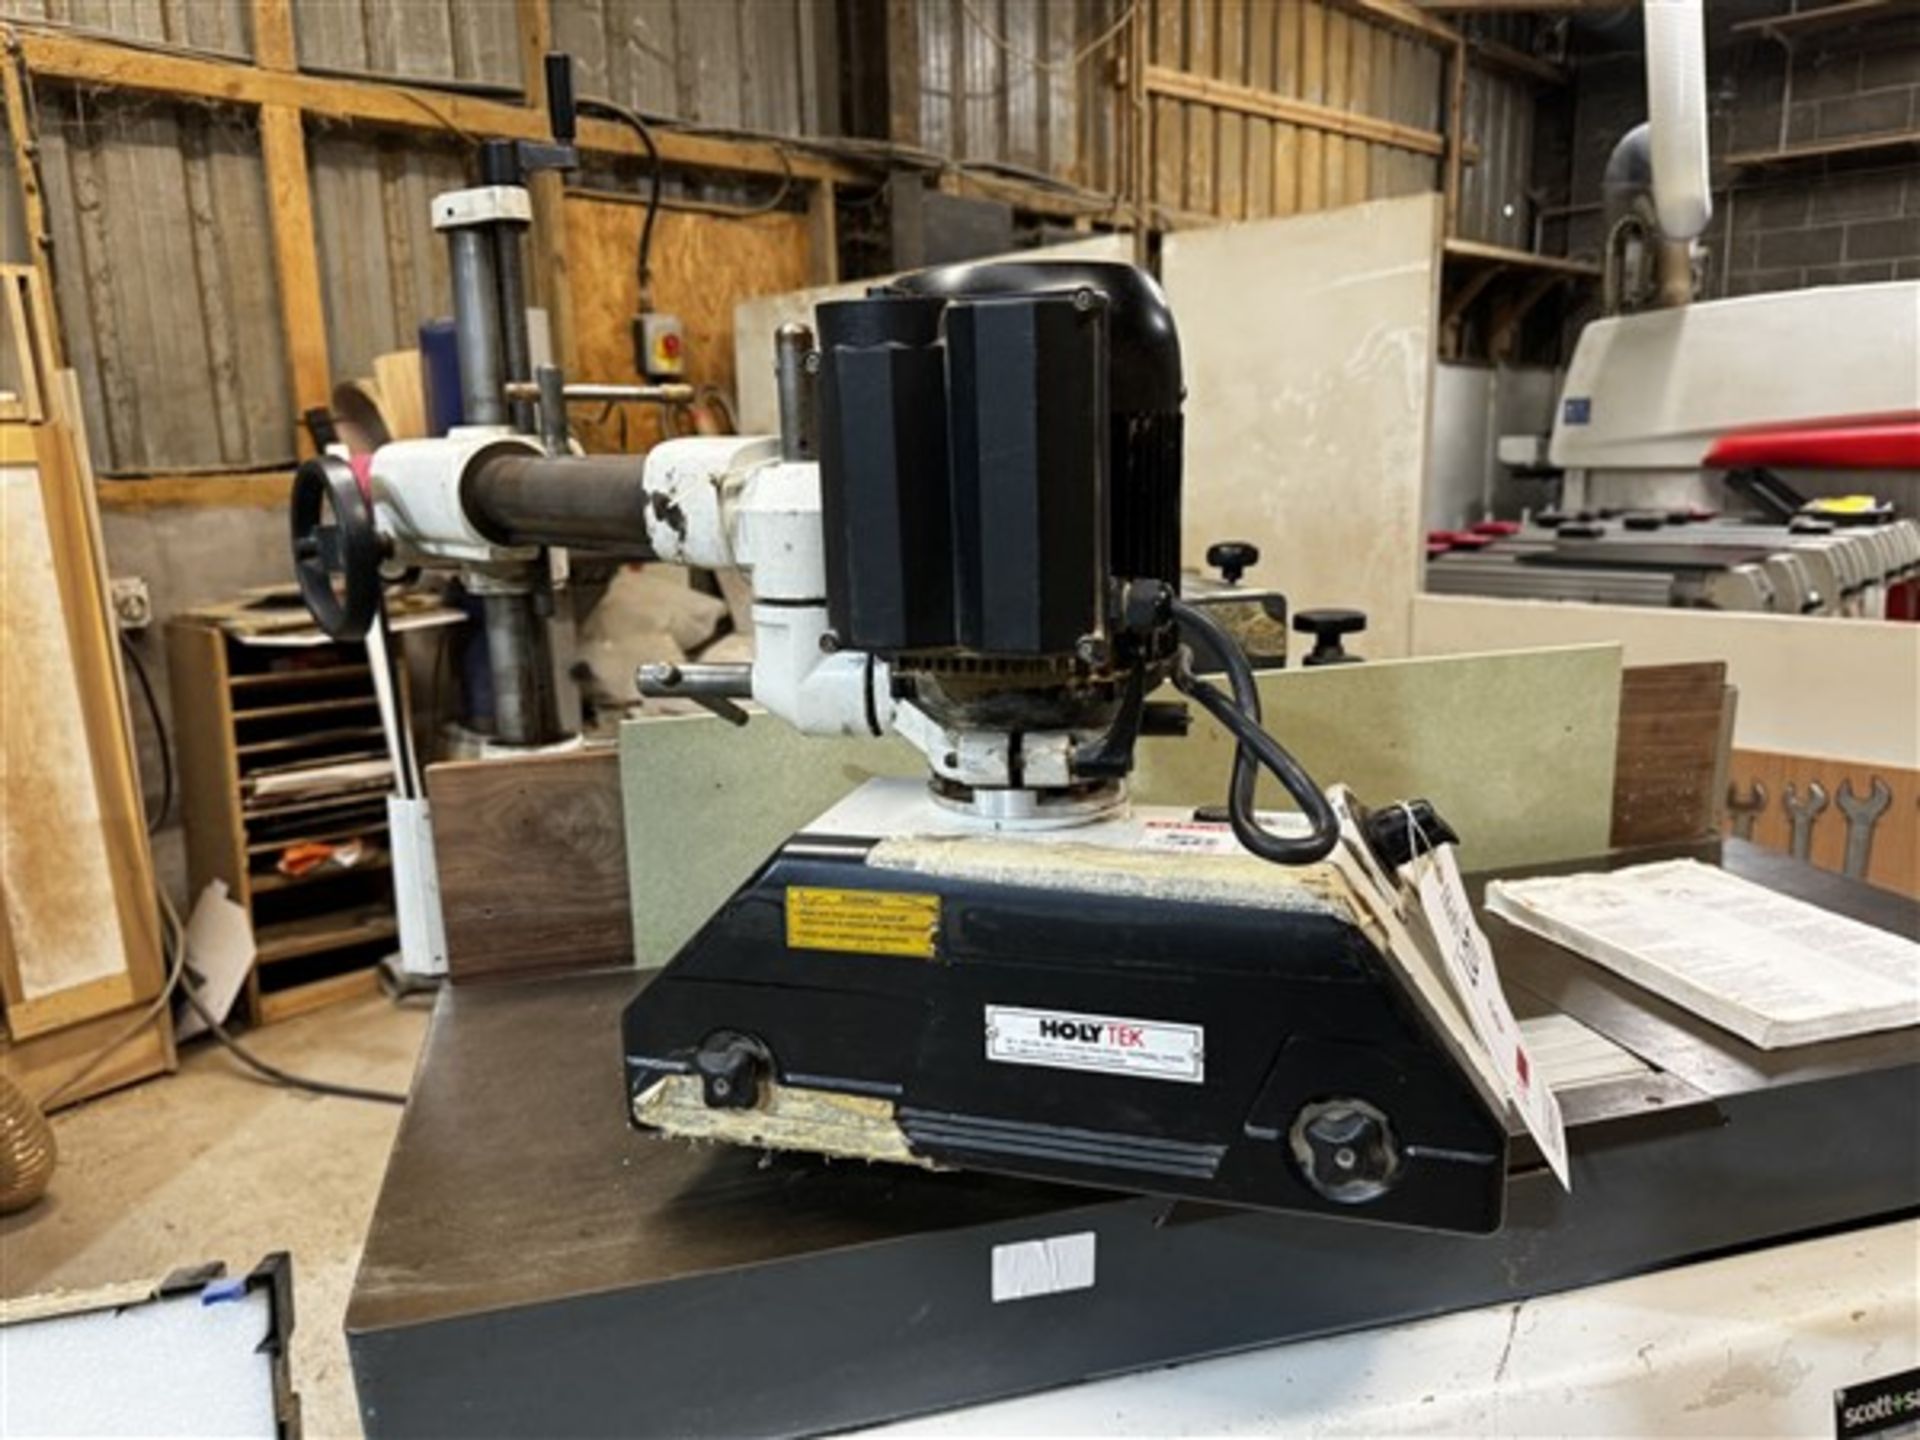 Paoloni TX160 spindle moulder, serial no. 20556 (2007) with overtable feeder - Image 7 of 12